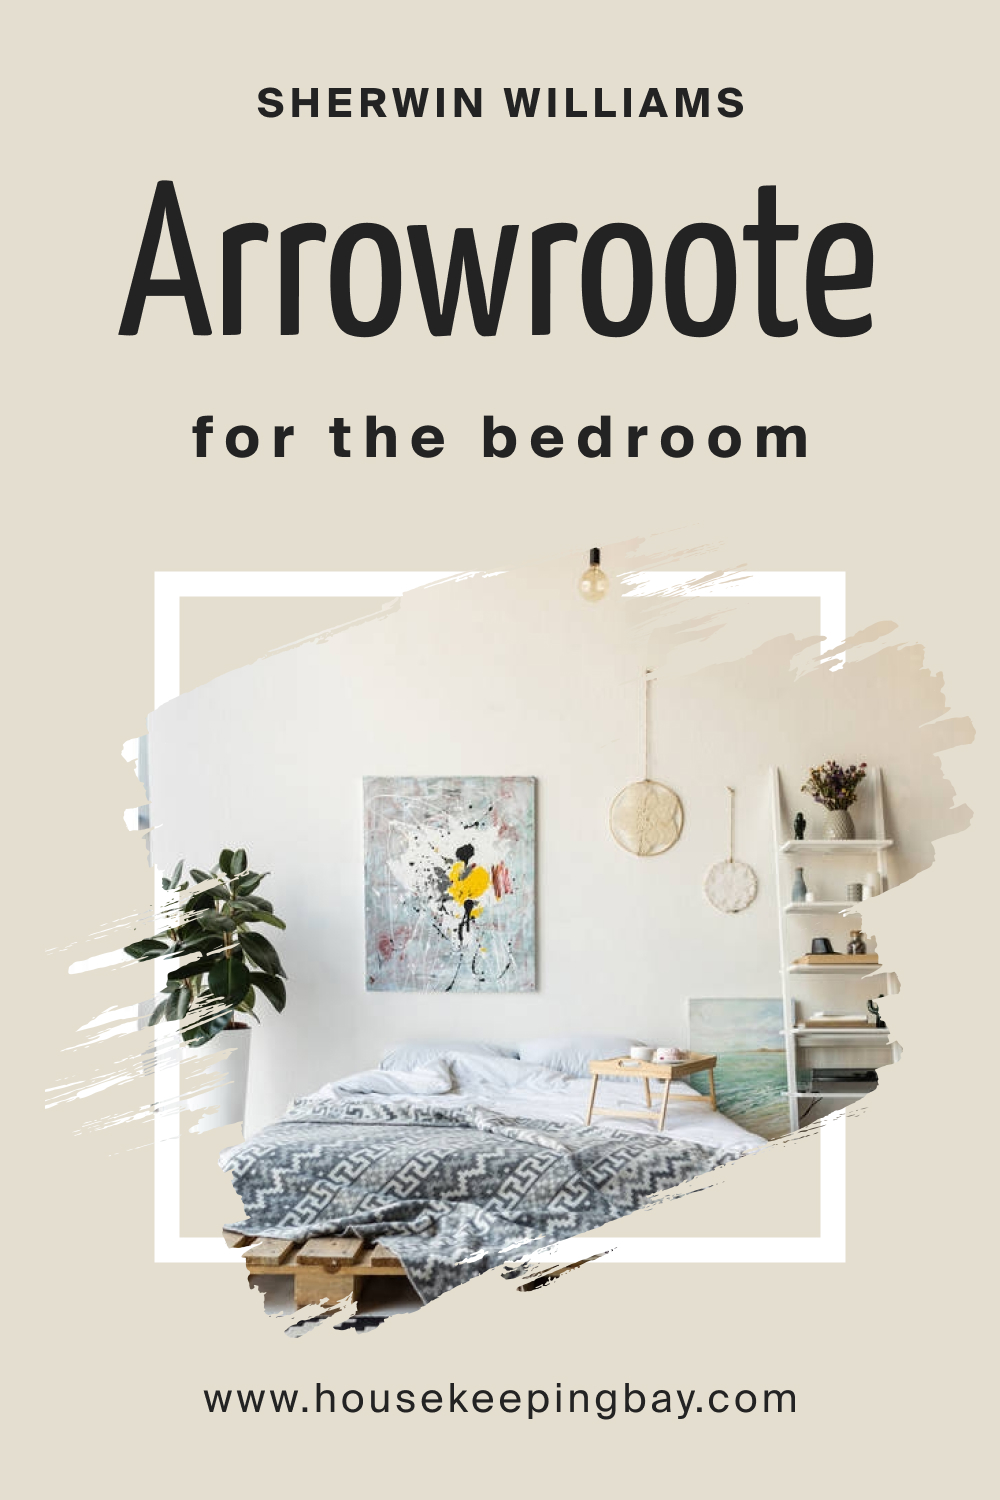 Sherwin Williams. SW 9502 Arrowroote For the bedroom